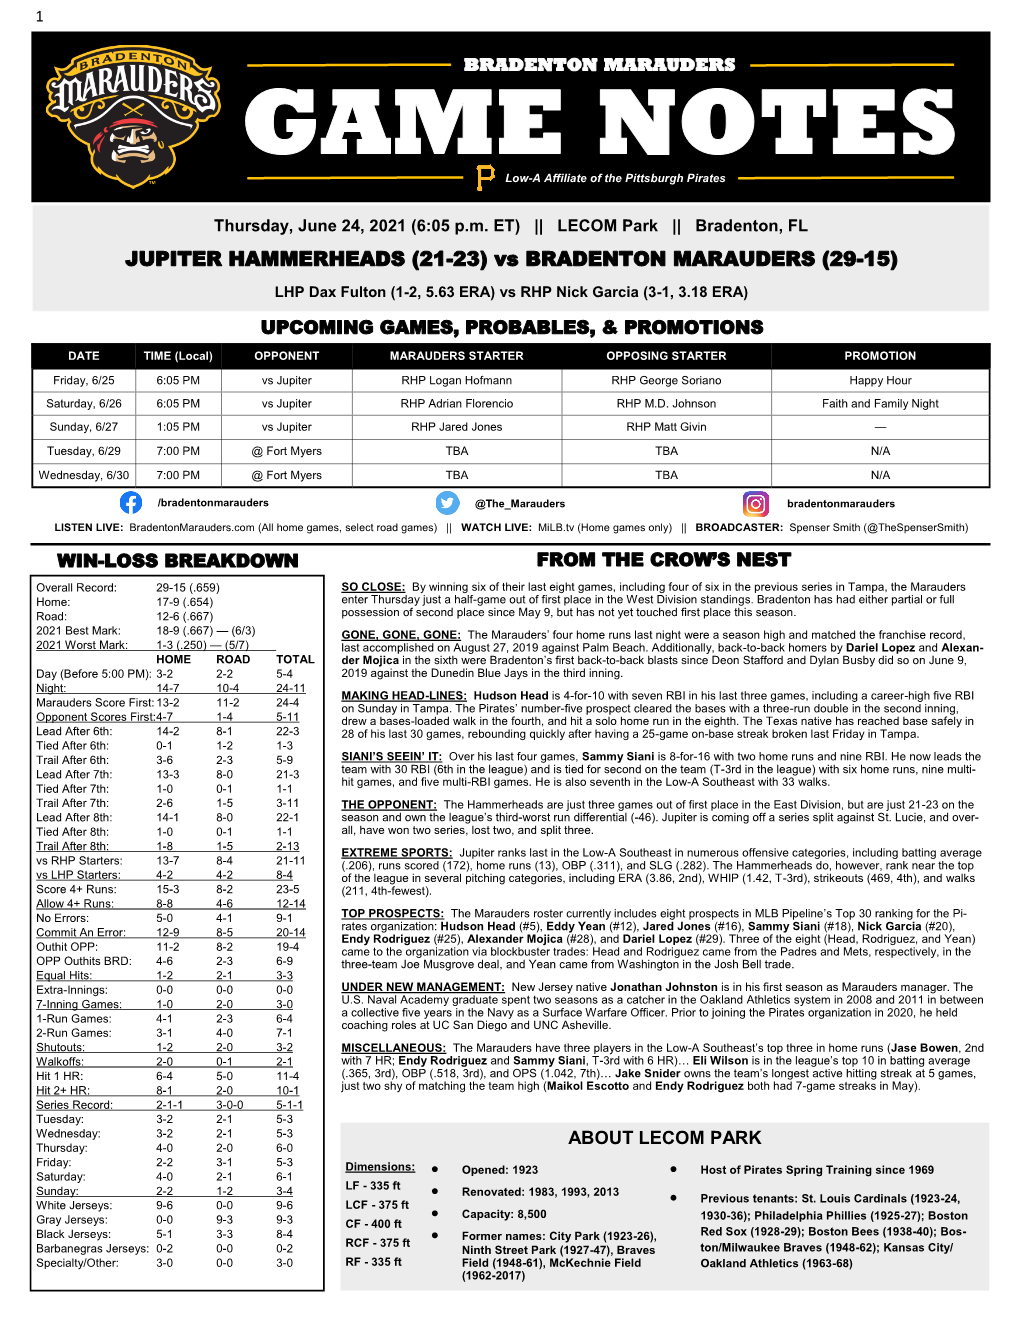 GAME NOTES Low-A Affiliate of the Pittsburgh Pirates